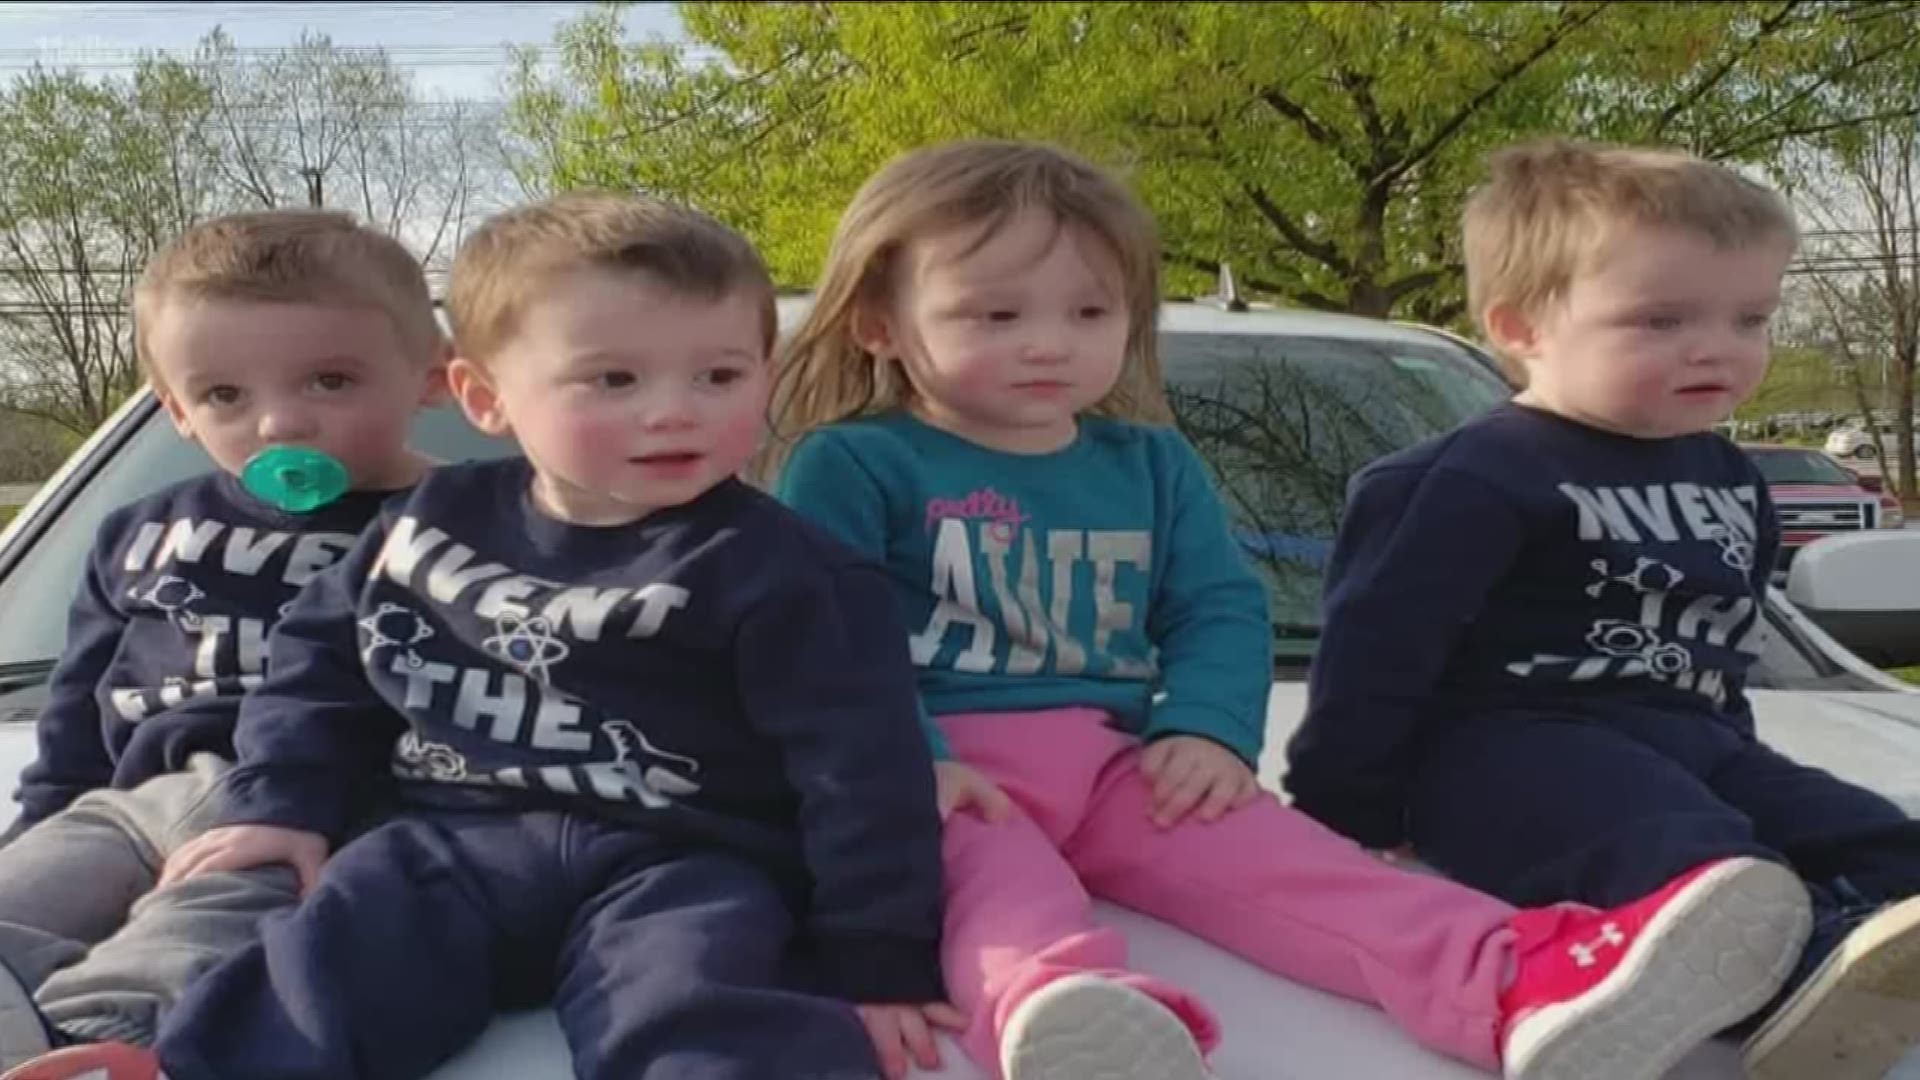 The "Miller quads" who became a sensation when they were born two years ago are starting to grow up. Nick Sturdivant catches up with the family on their life-changing experience.